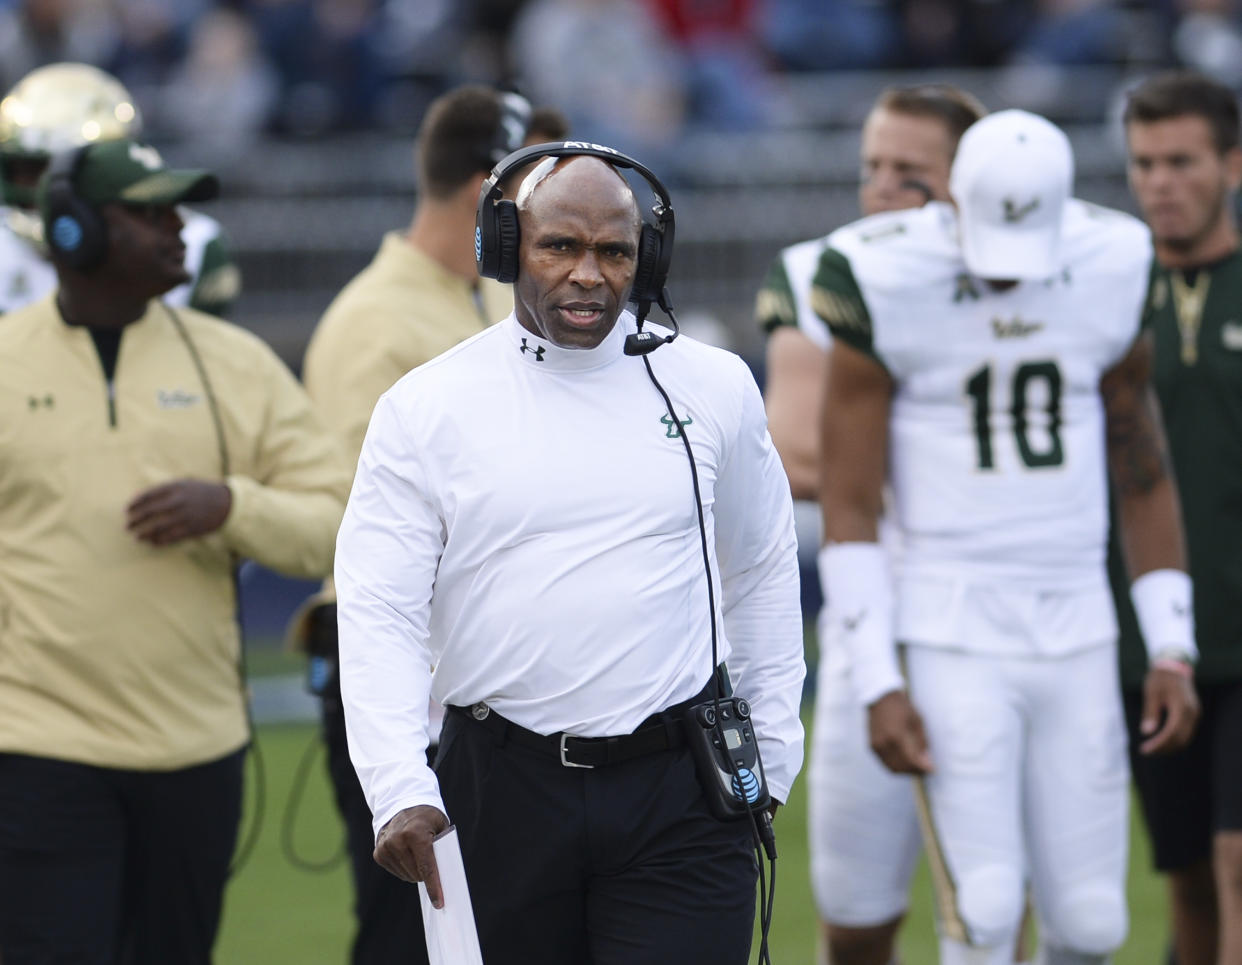 South Florida head coach Charlie Strong works the sidelines in the game against Connecticut on Saturday, Nov. 4, 2017, in East Hartford, Conn. (AP Photo/Stephen Dunn)